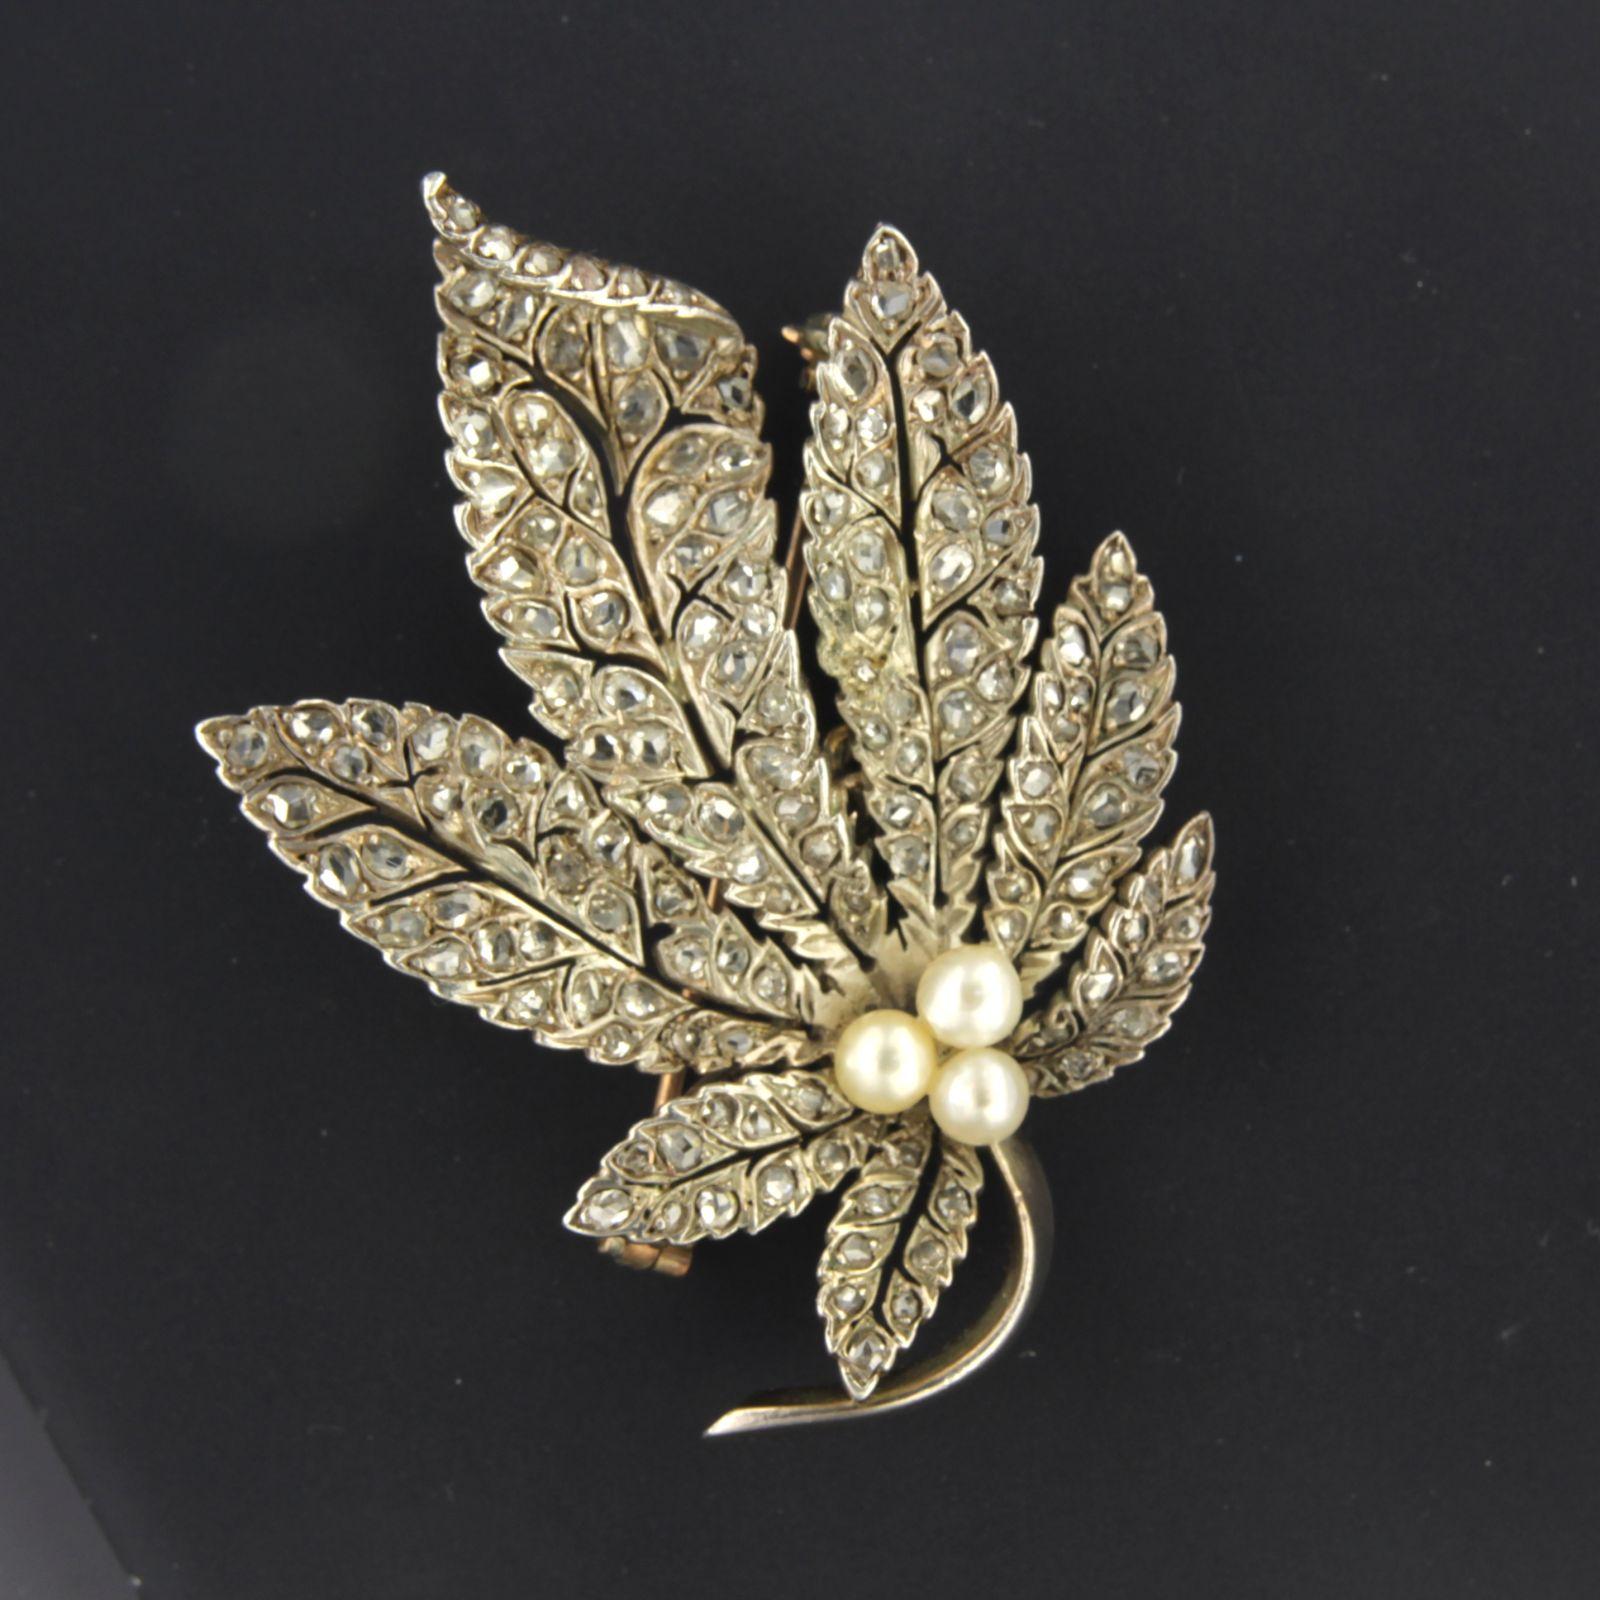 Antique 14kt golden leave broche with rose cut diamonds 1.00 carat H-I color SI-P clarity, set on 835 silver.

The leaves are full set with numerous rose cute diamonds, and in middle are three small pearls.

Weight 19.9 grams
Dimensions : 6.0 cm x